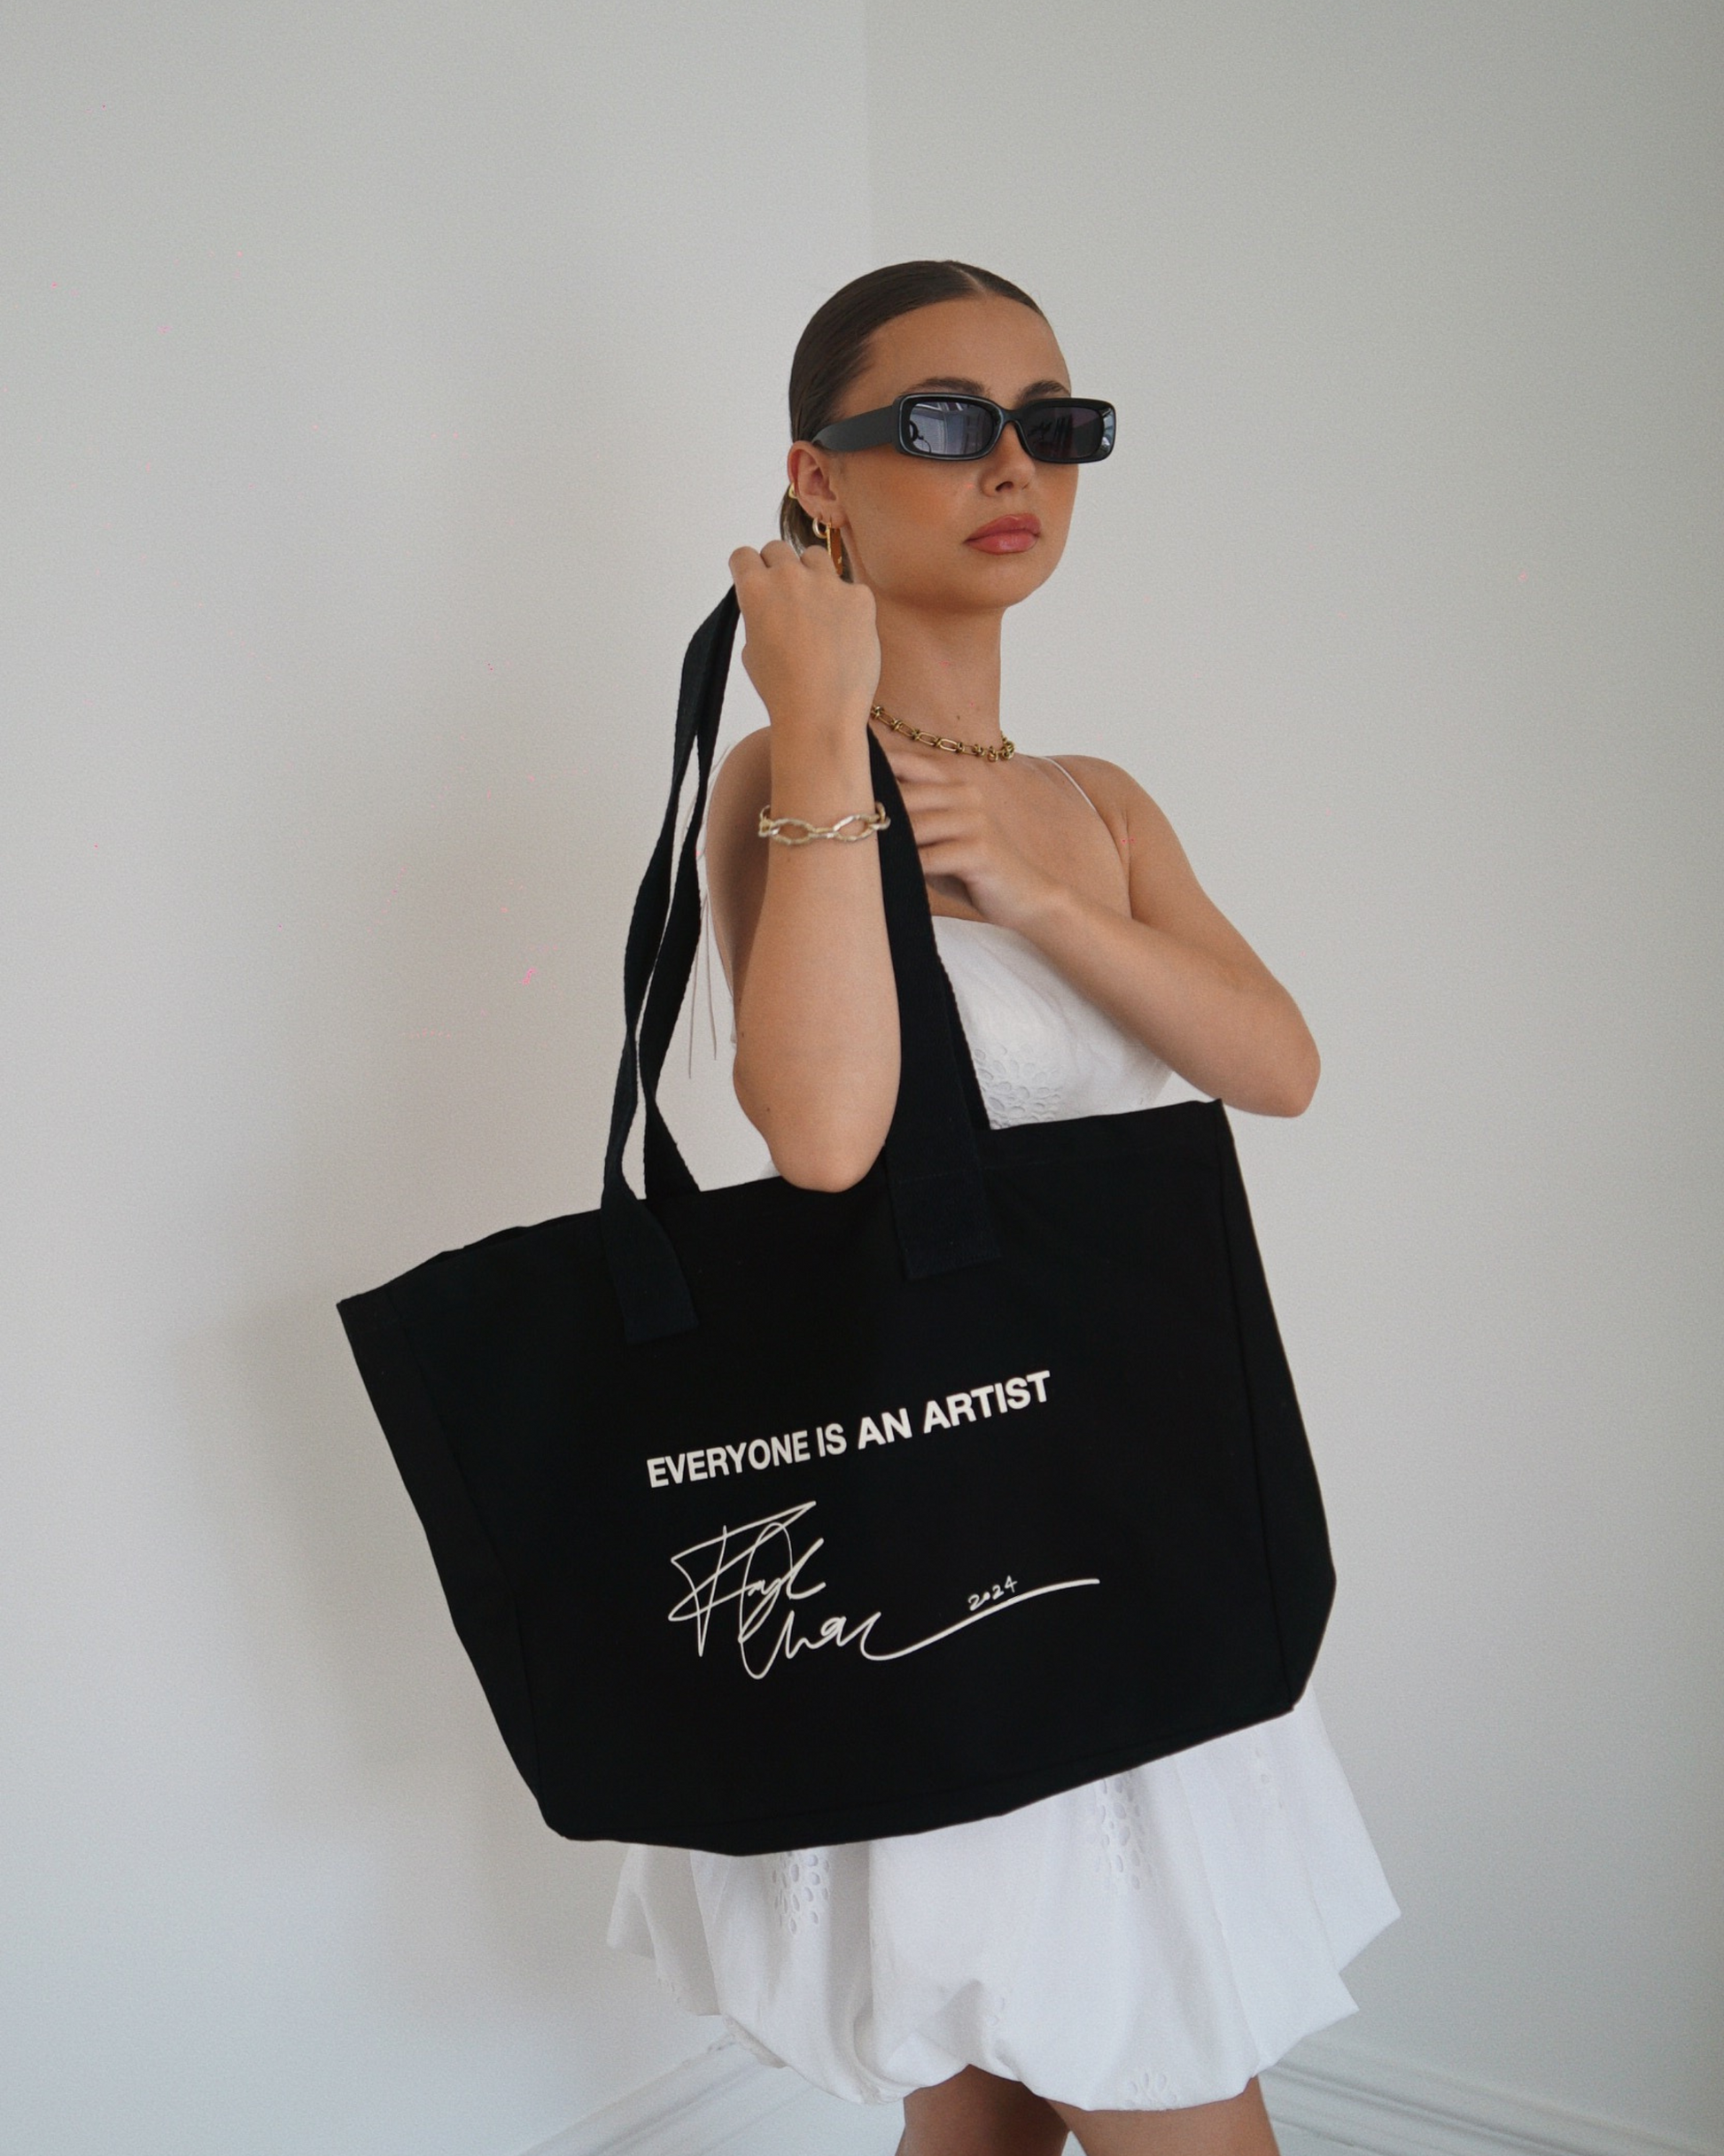 Herstory of Art Tote – MoMA Design Store